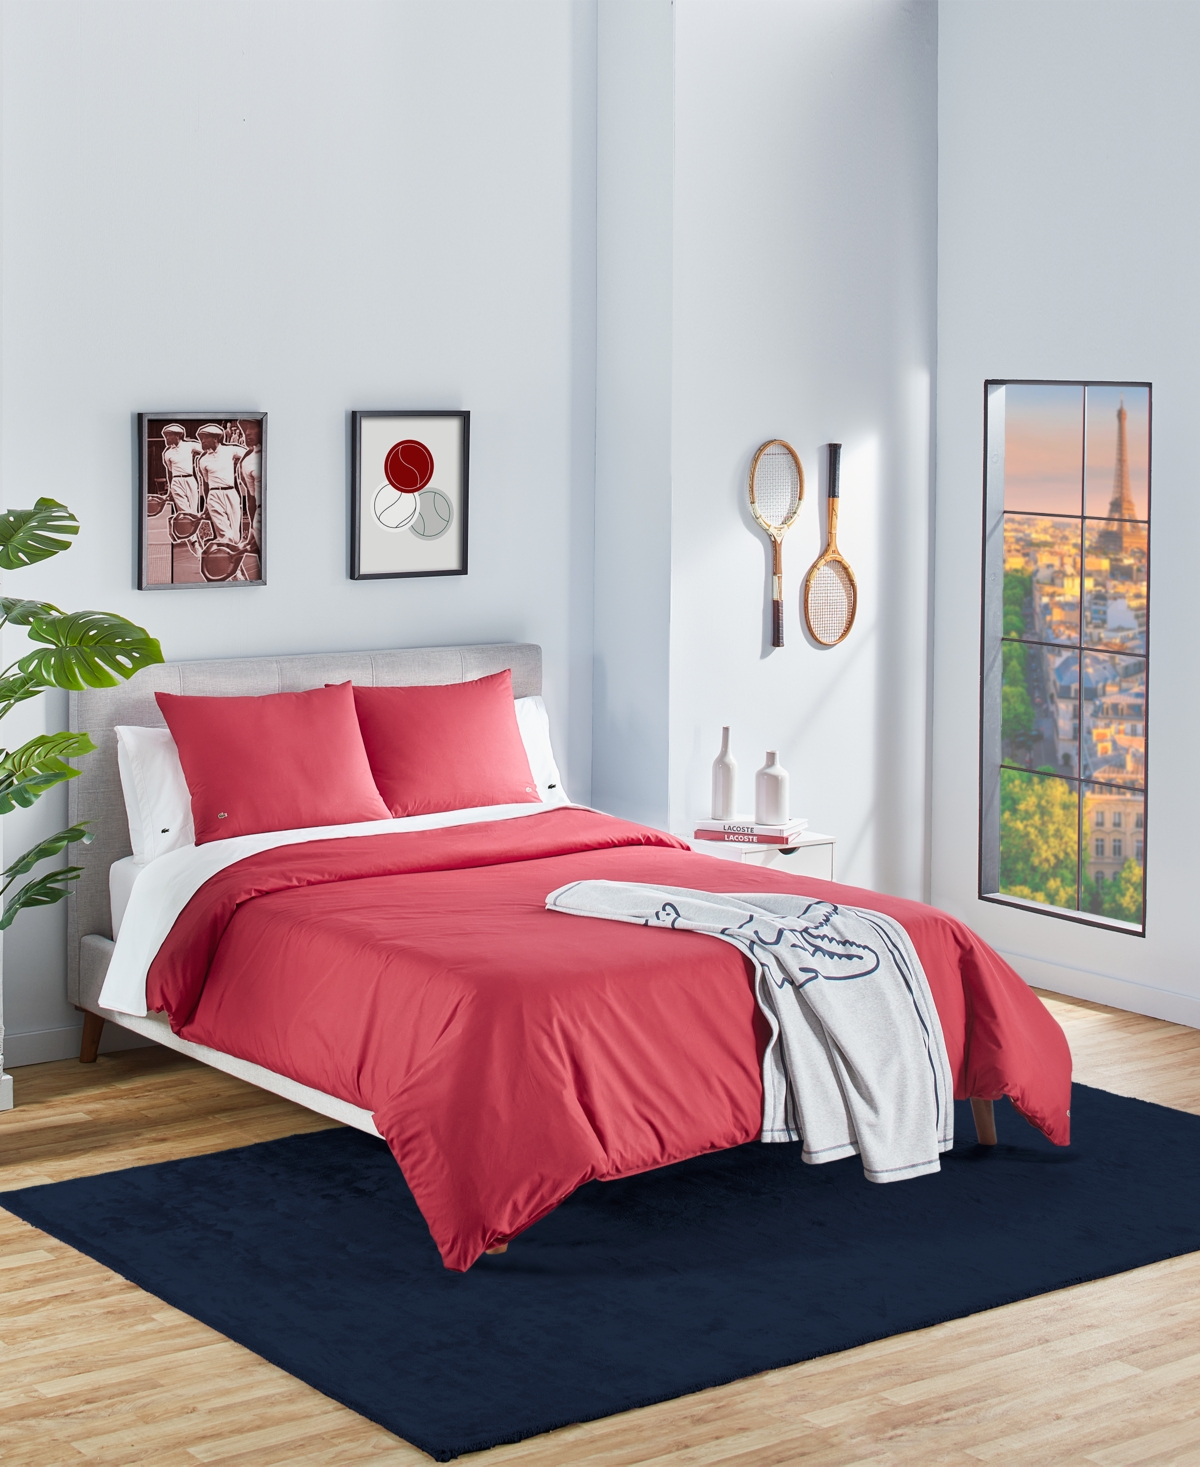 Lacoste Percale 3 Piece Duvet Set, Full/queen In Chili Pepper